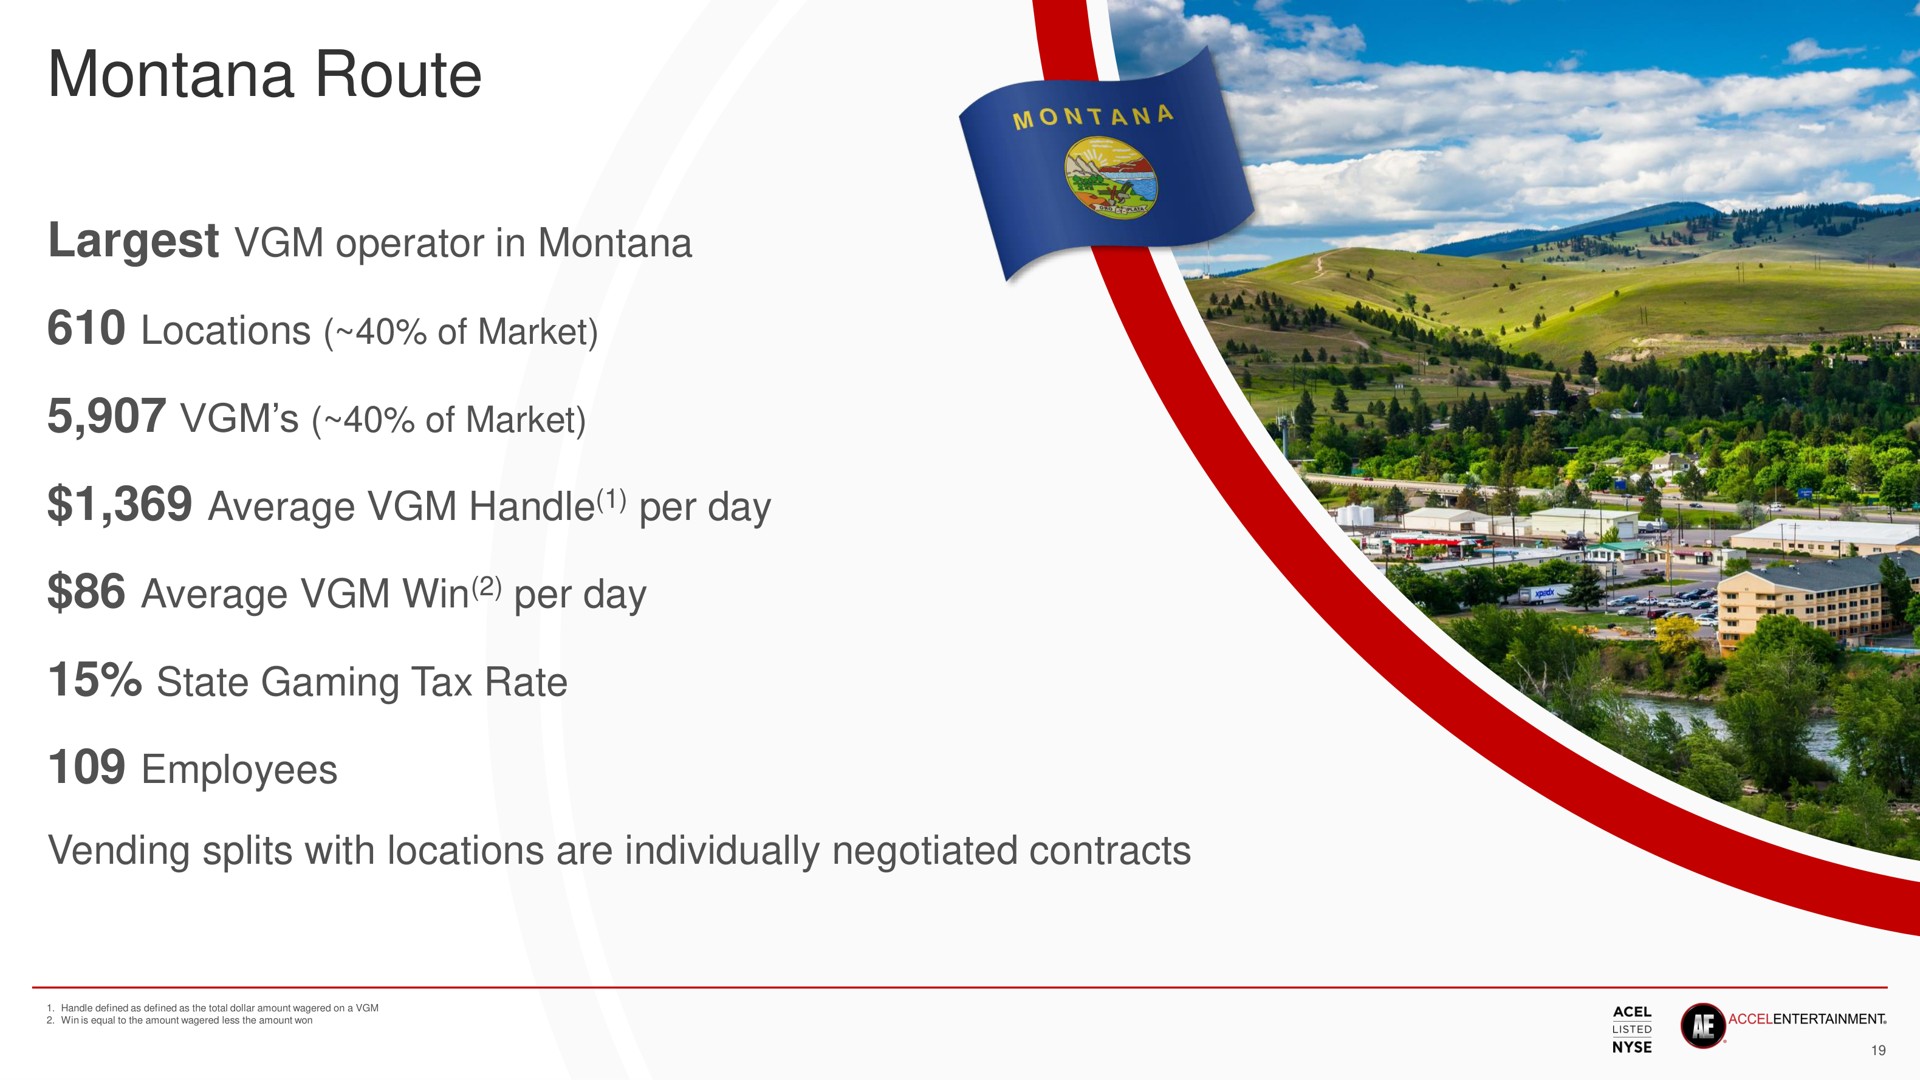 montana route operator in of market state gaming tax rate average win per day average handle per day employees | Accel Entertaiment